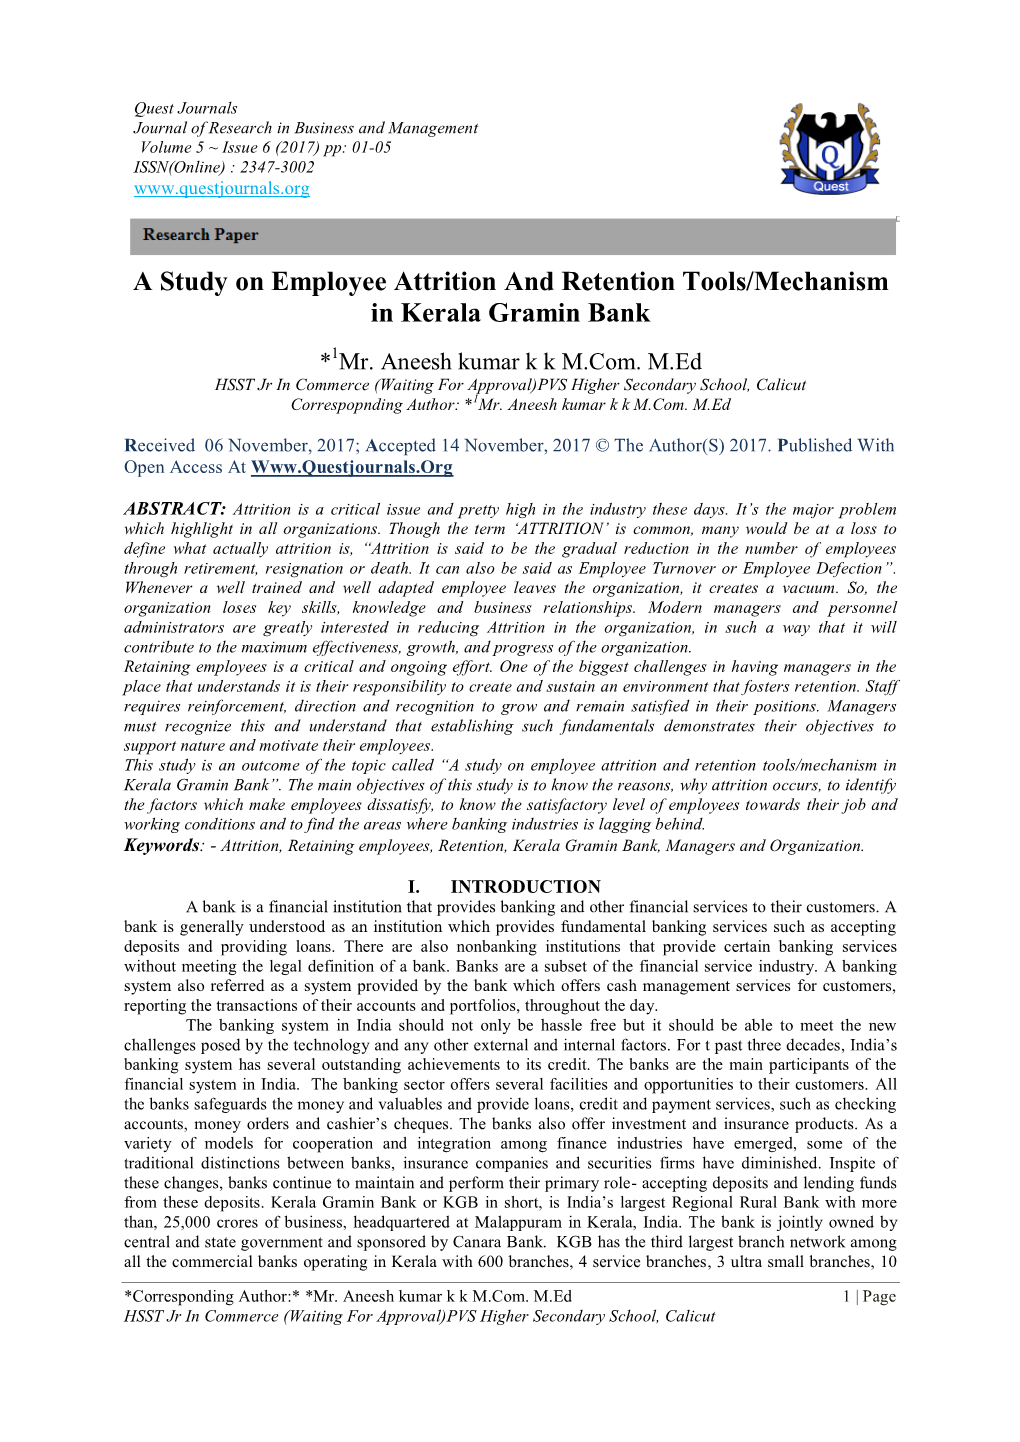 A Study on Employee Attrition and Retention Tools/Mechanism in Kerala Gramin Bank